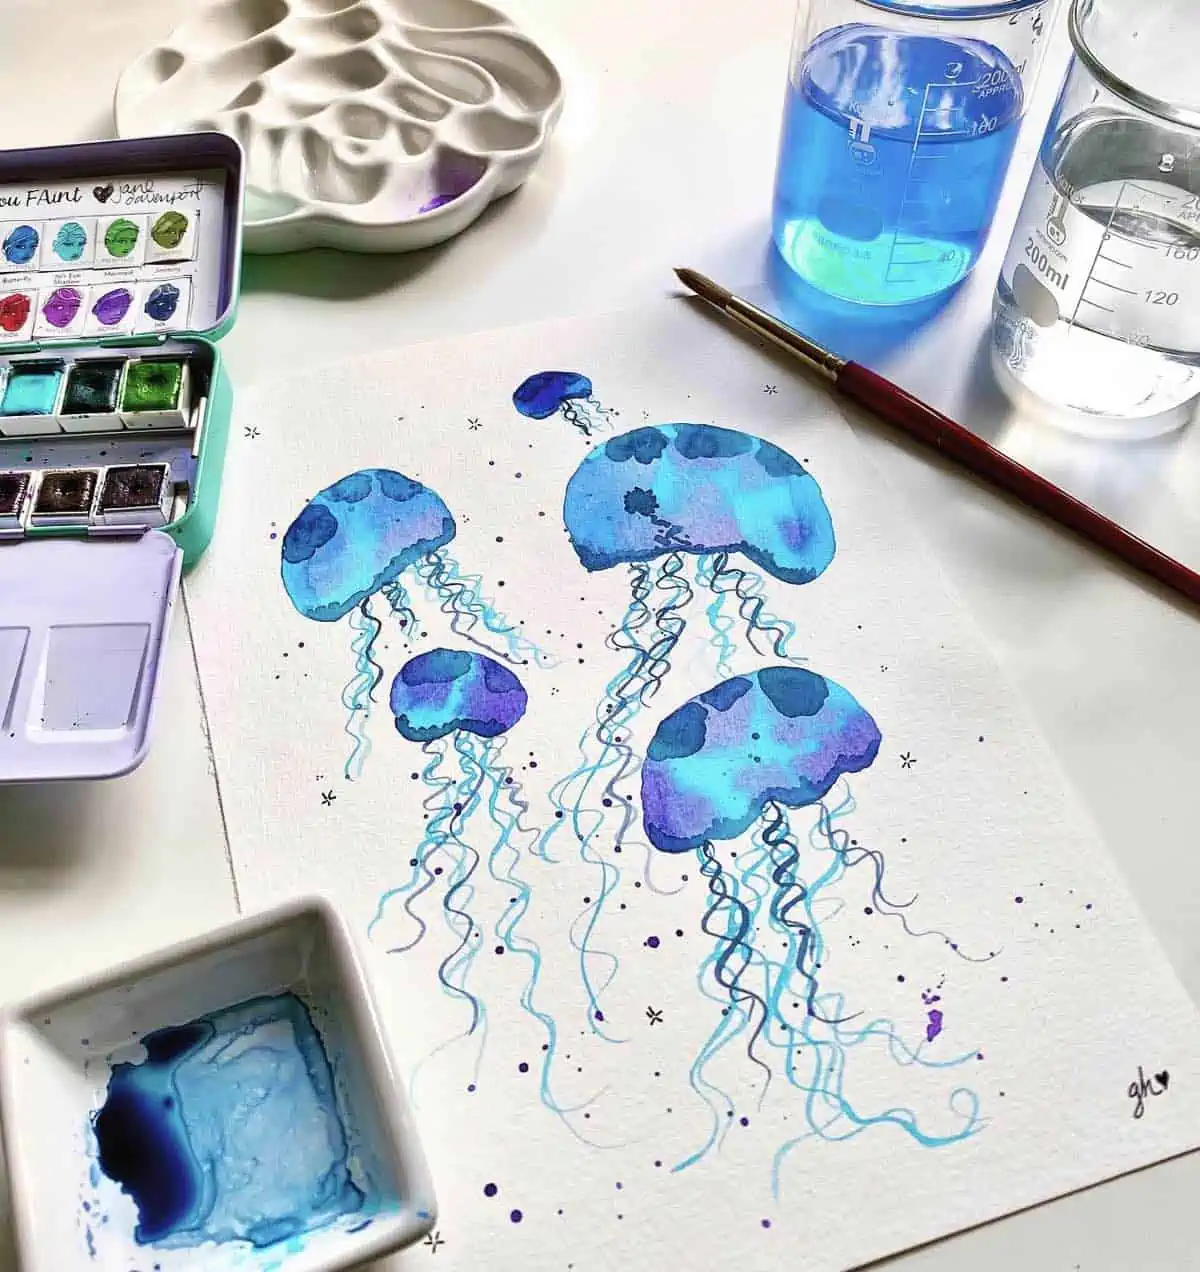 jellyfish watercolor painting with cruelty-free art supplies